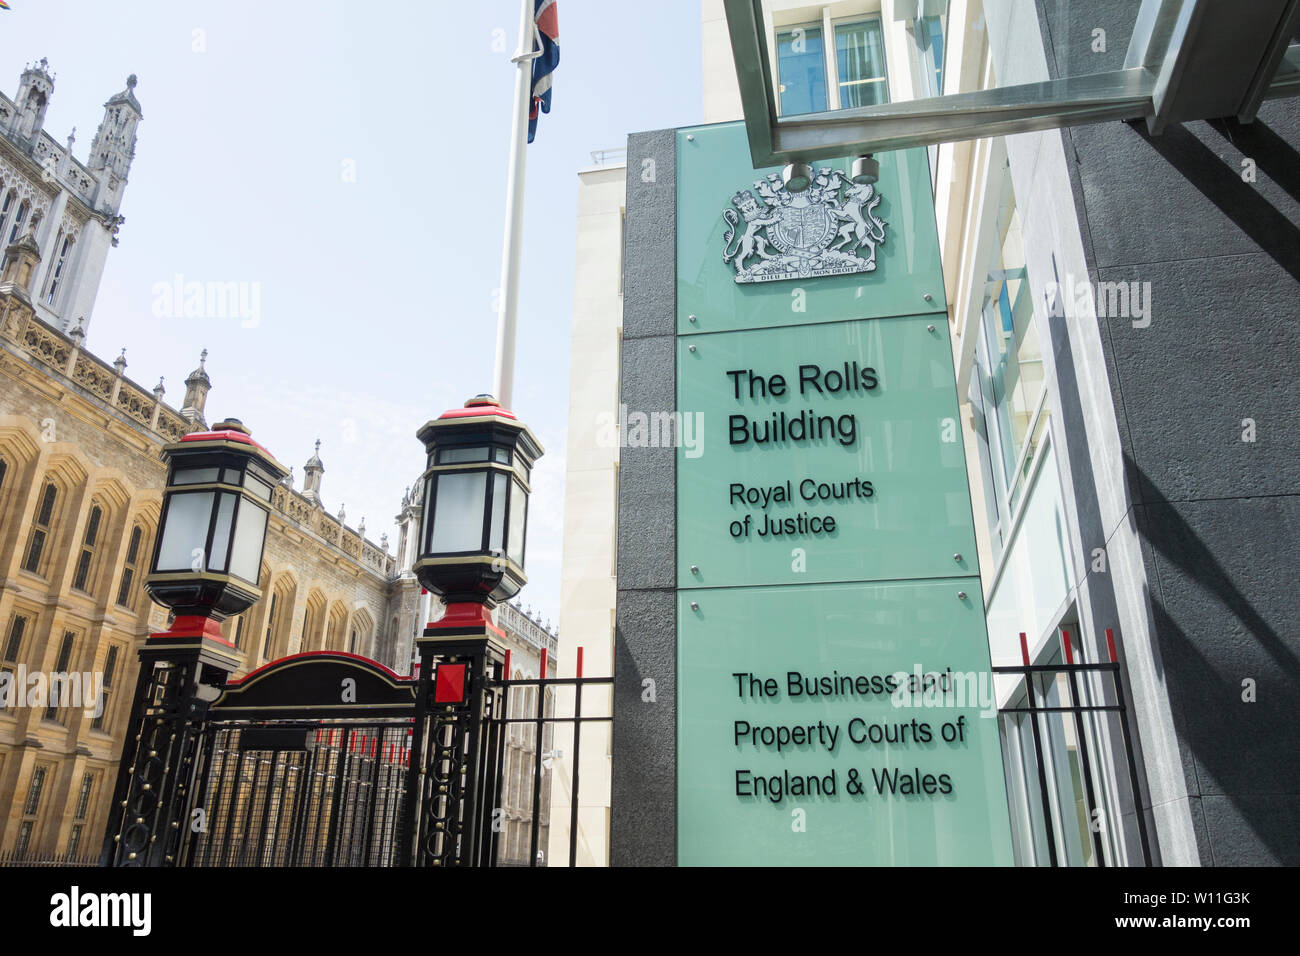 Eintritt zum Rolls Building, Royal Courts of Justice, Business and Property Courts of England and Wales, Fetter Lane, London, England, Großbritannien Stockfoto